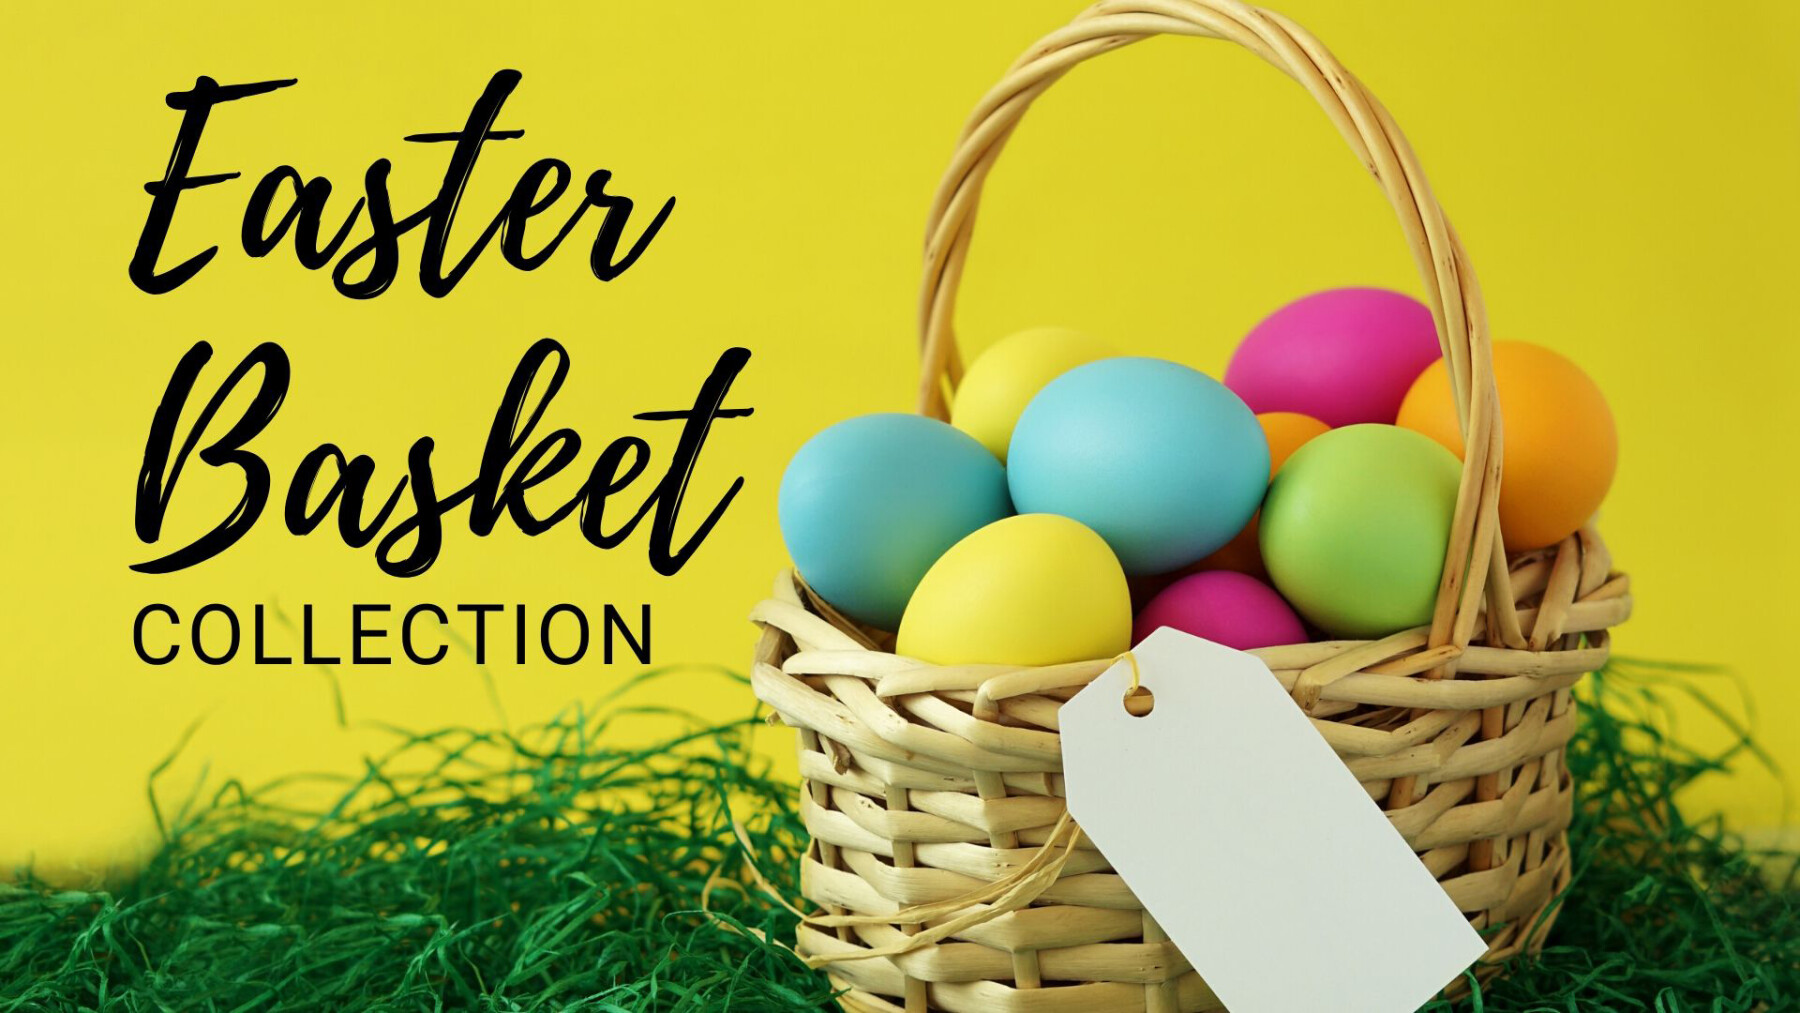 Annual Easter Basket Collection (Baskets due)